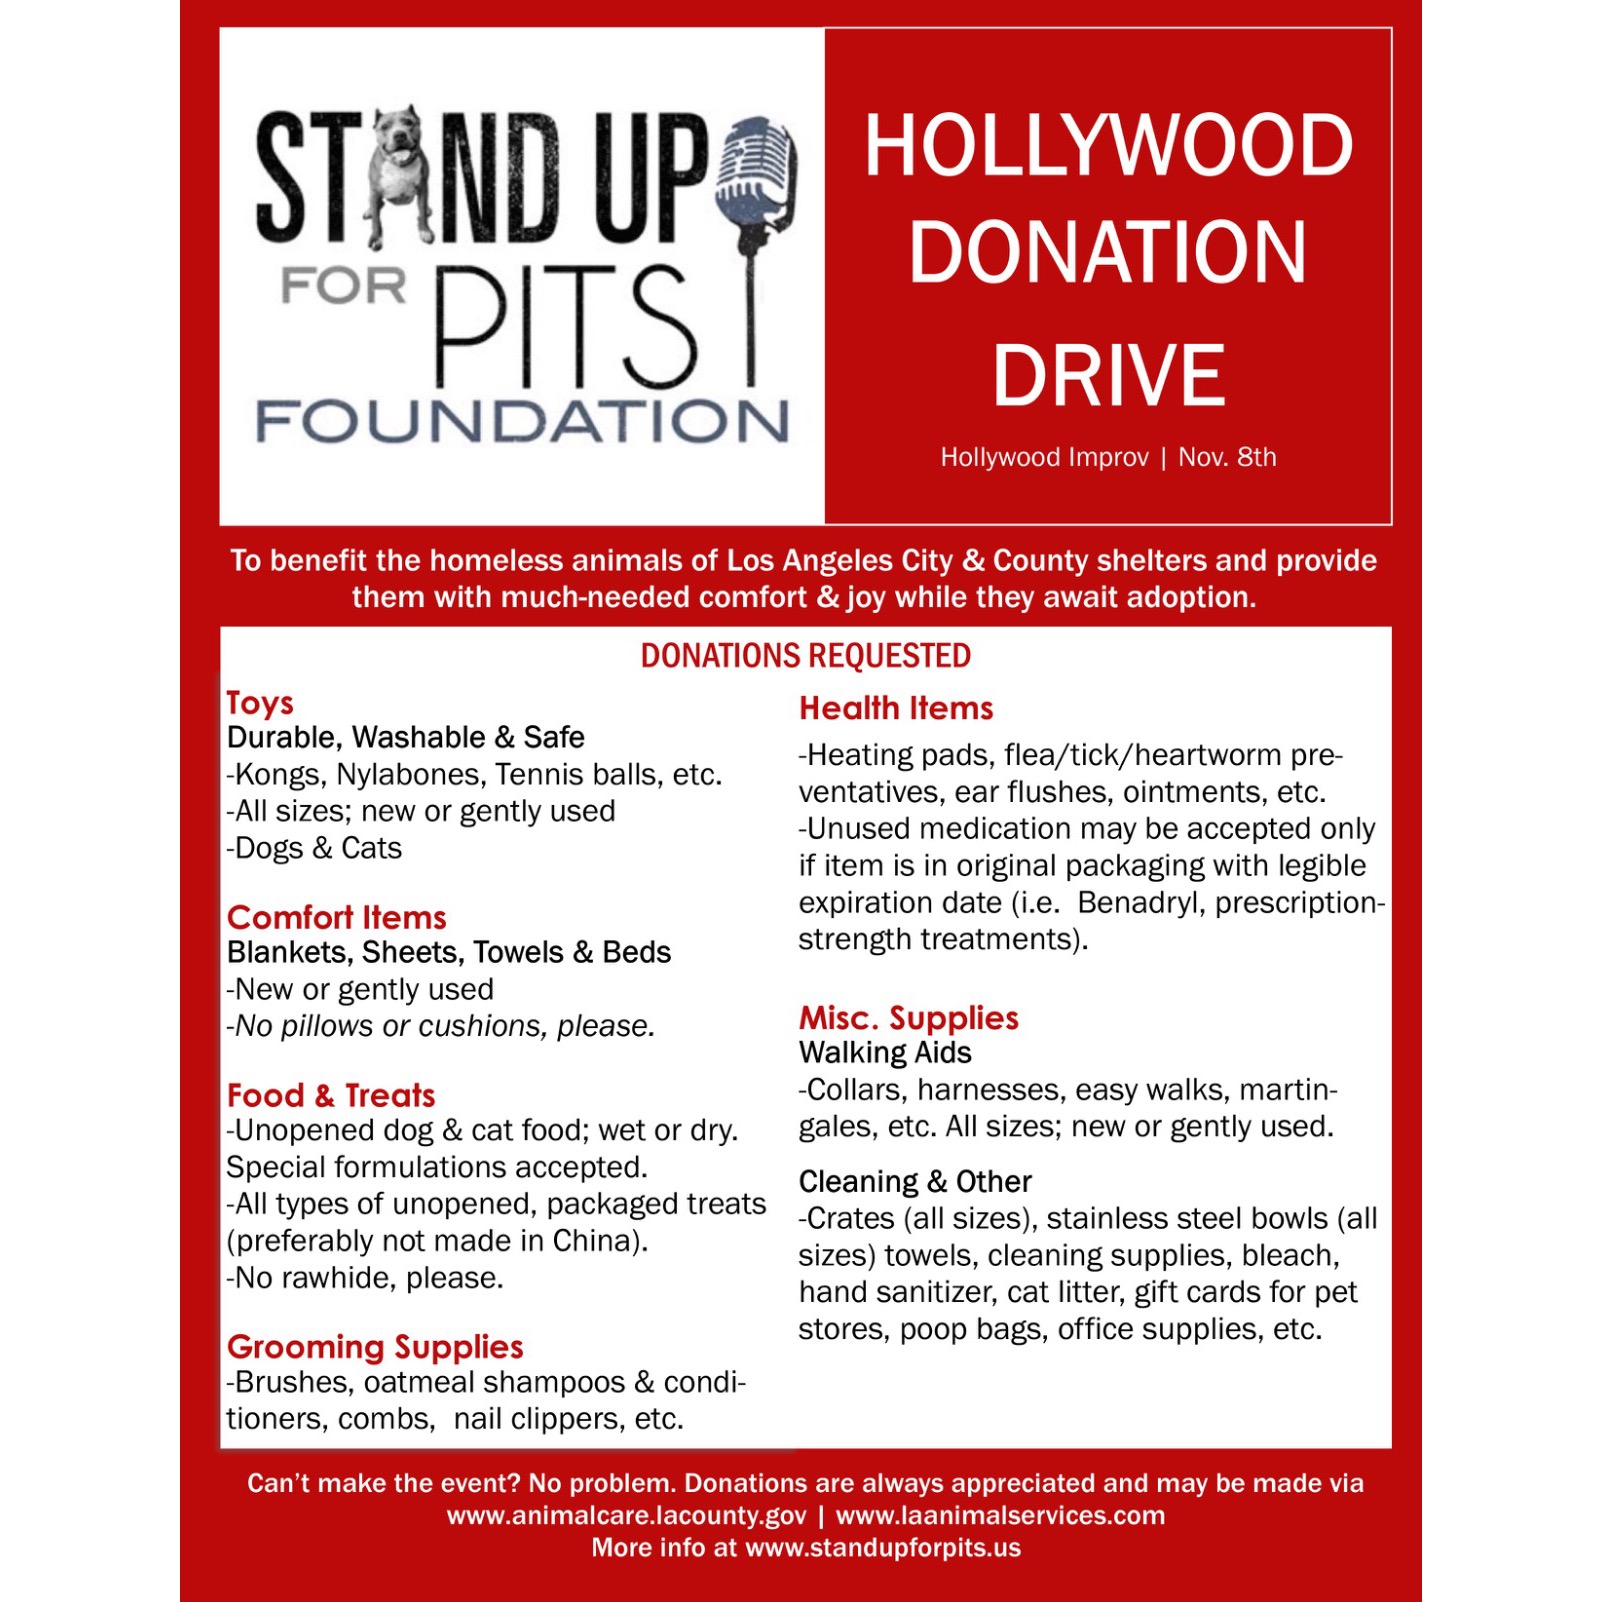 SUFP HOLLYWOOD DONATION DRIVE!